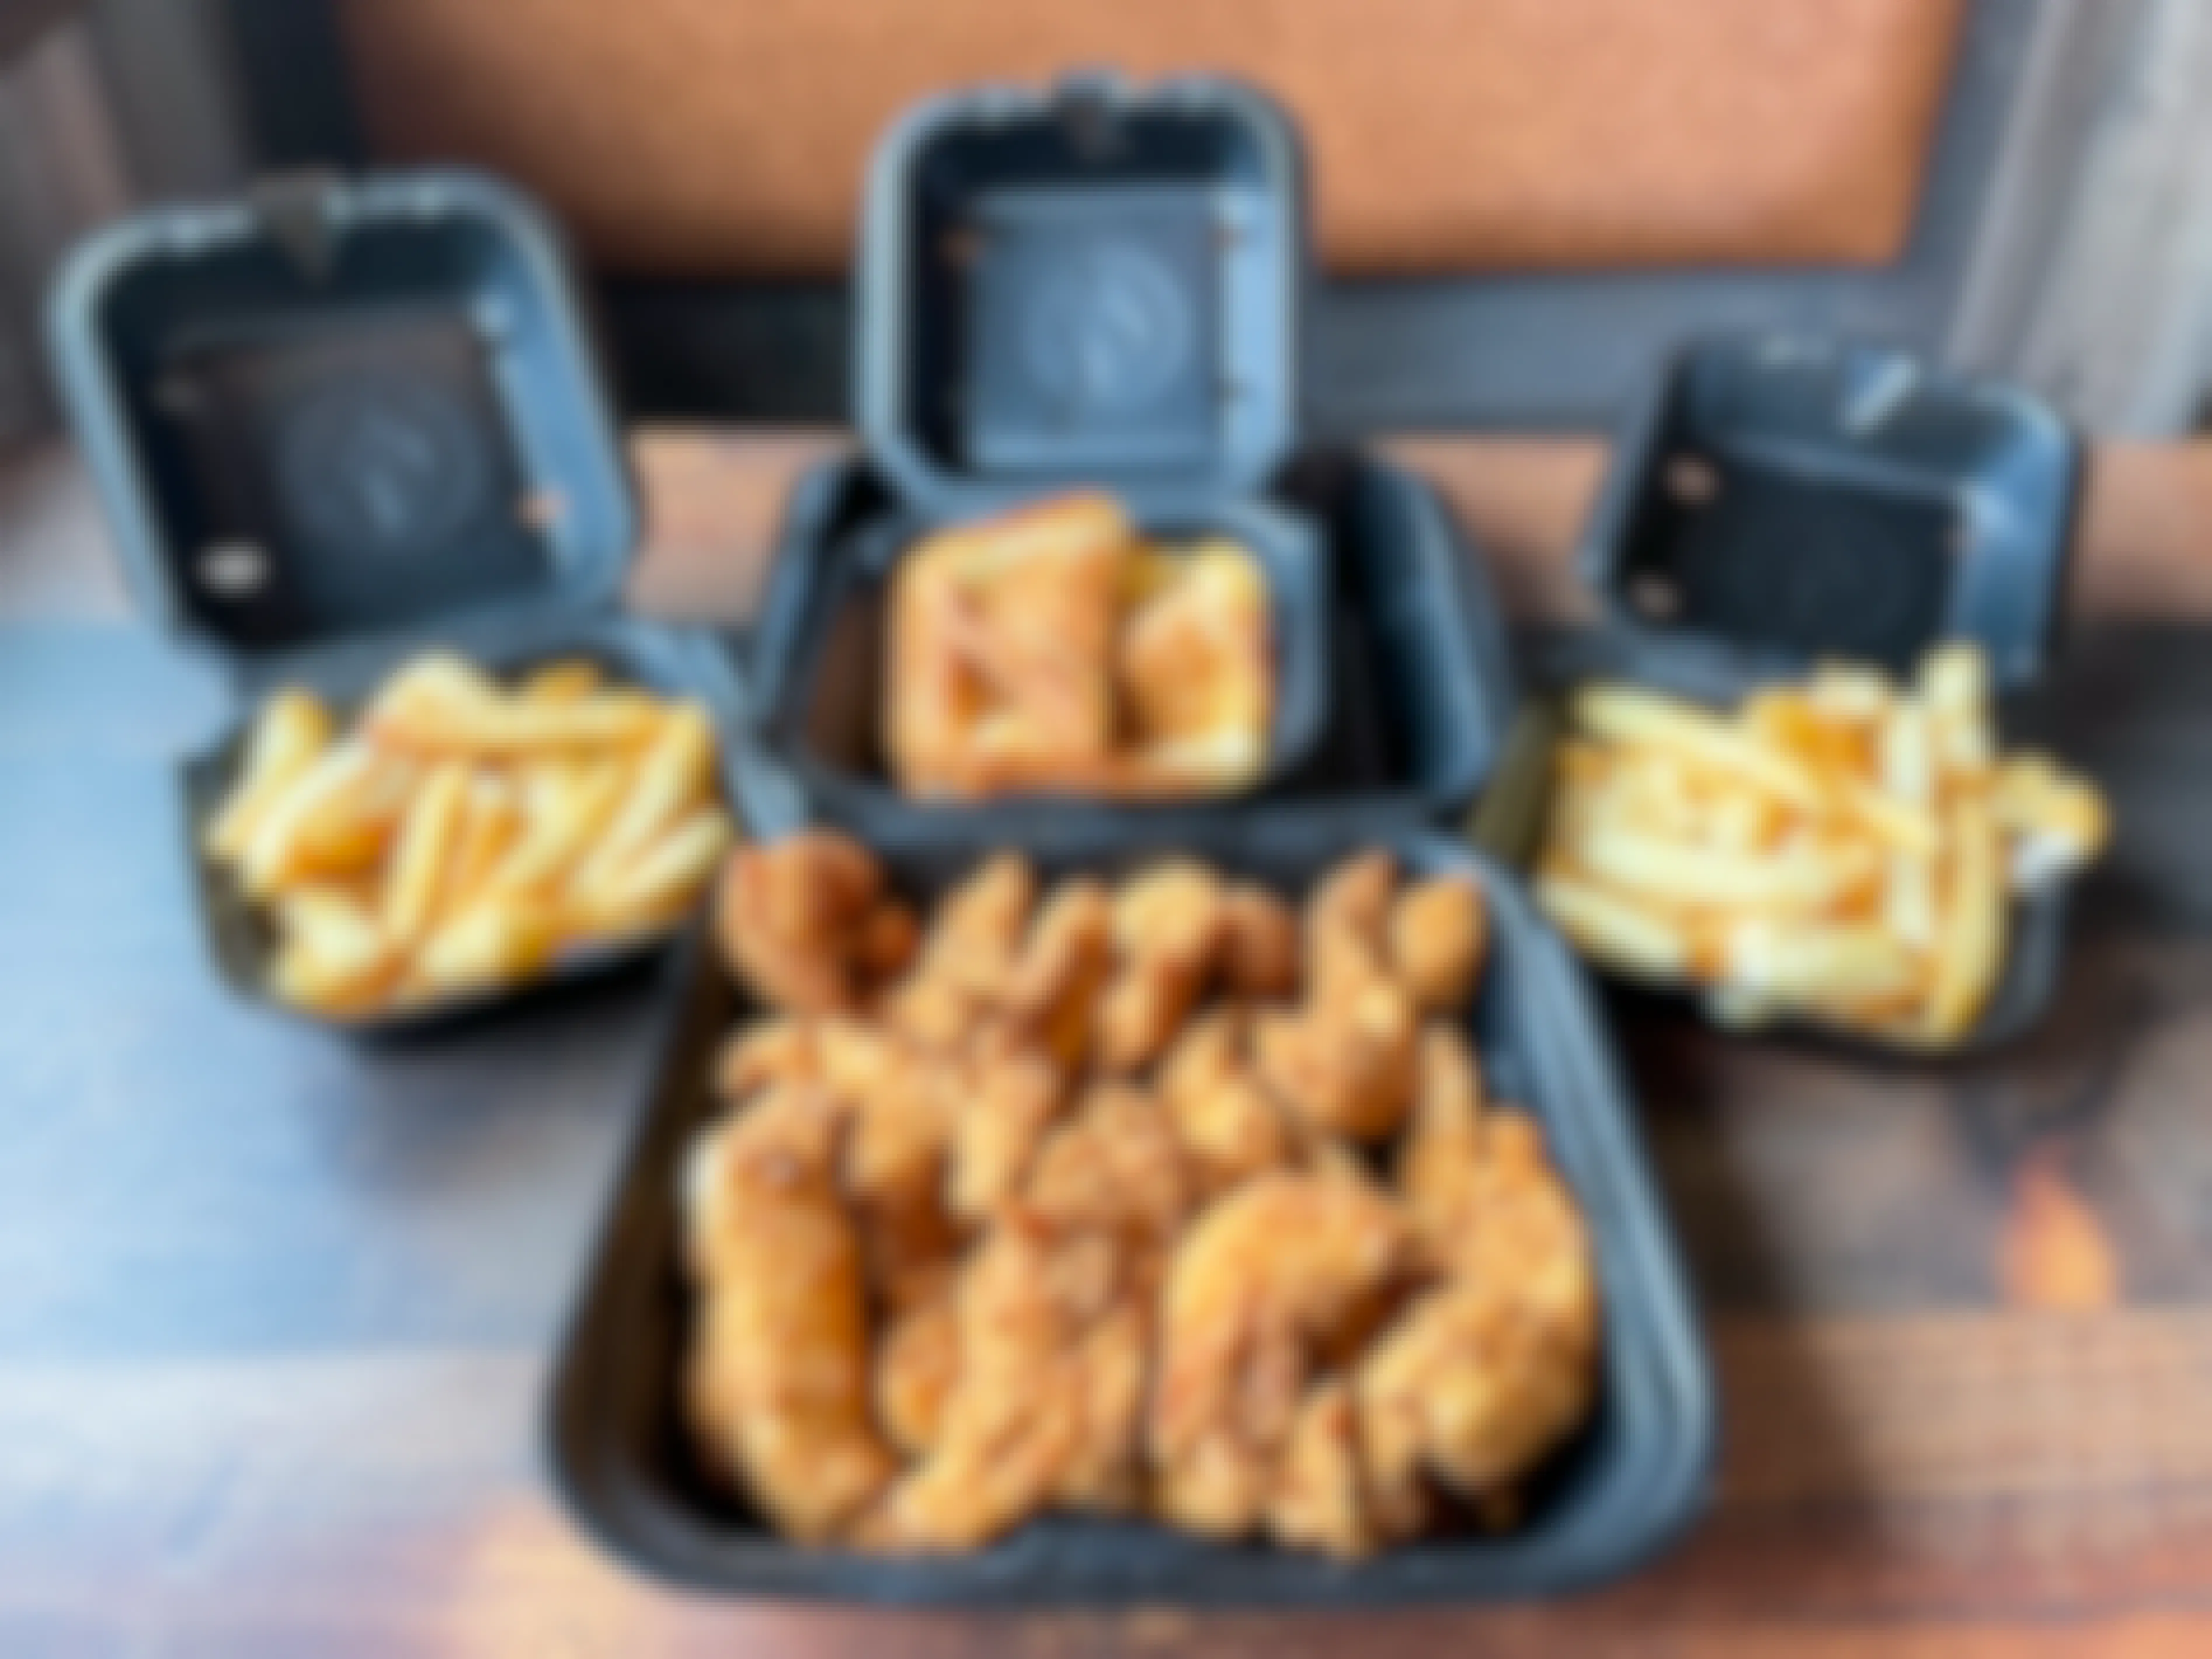 A chicken tender family meal from Zaxby's in open boxes on a table.